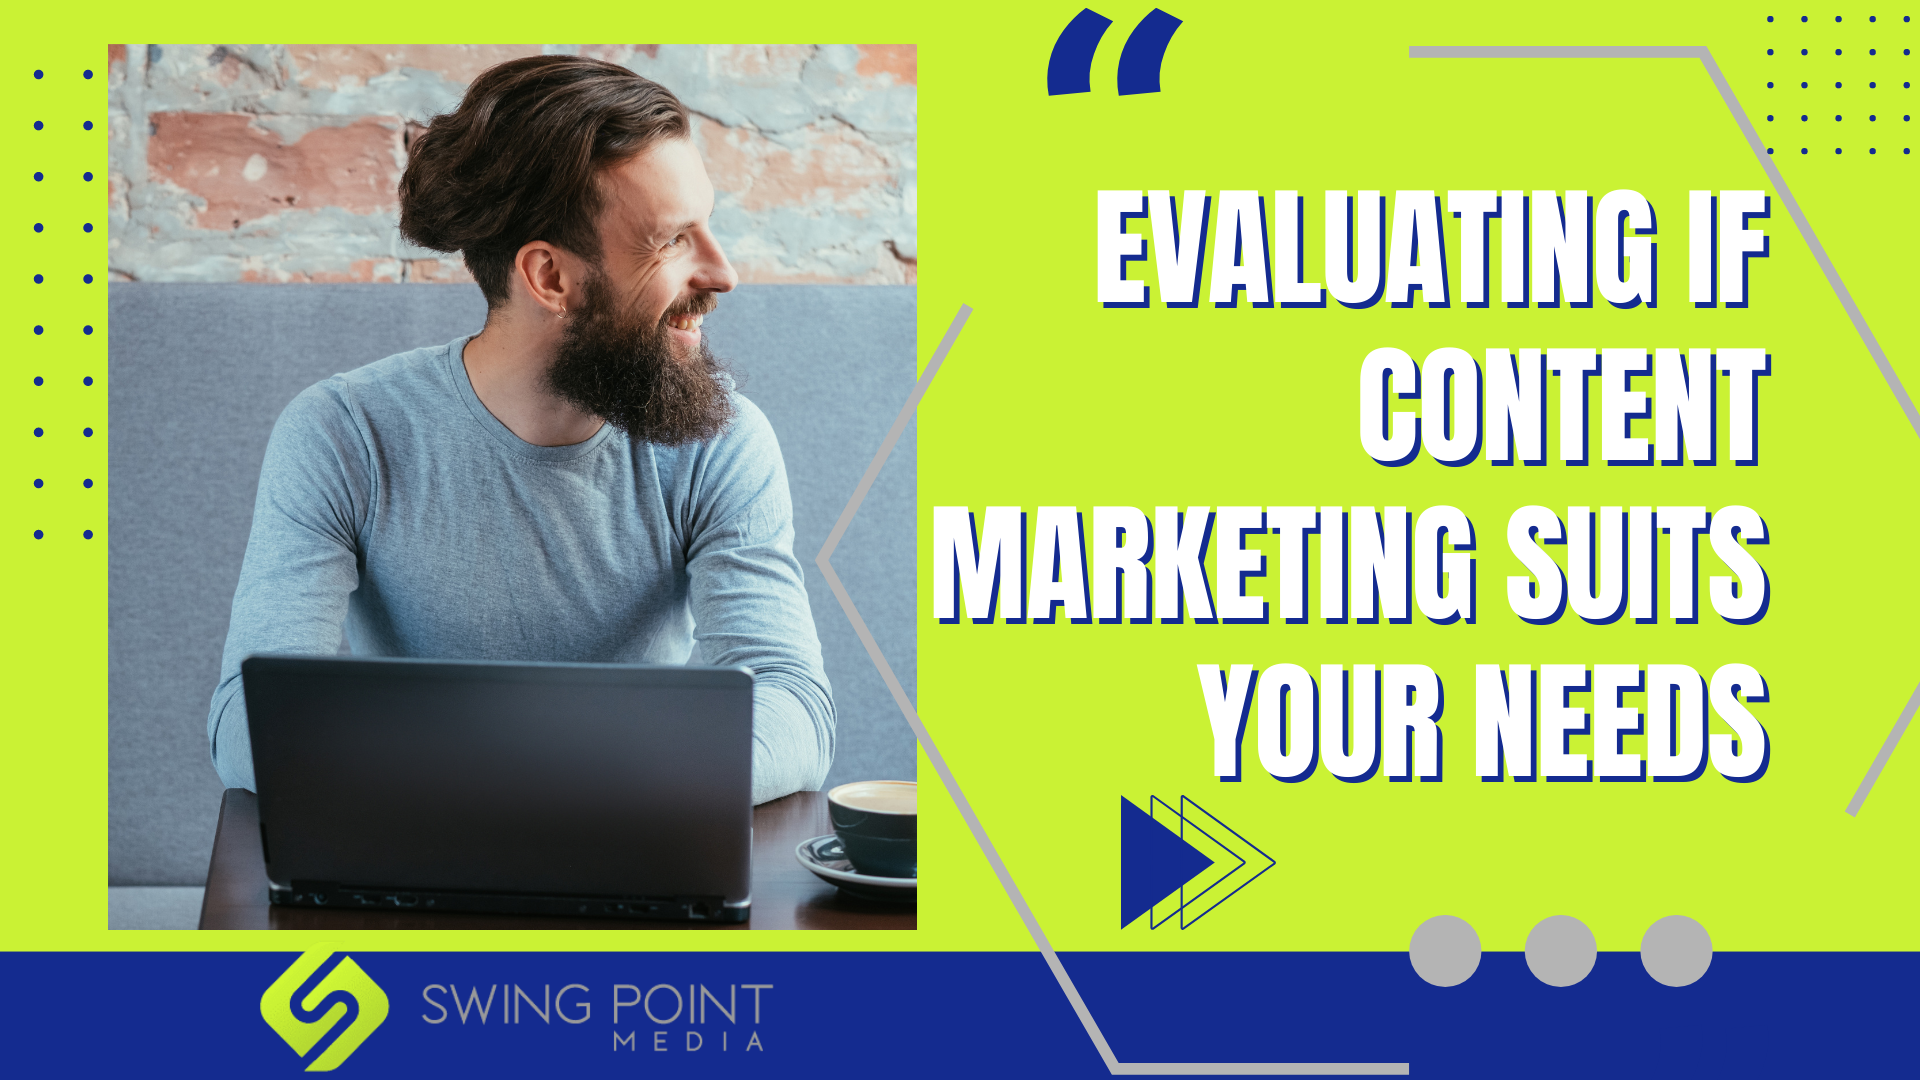 Evaluating if Content Marketing Suits Your Needs